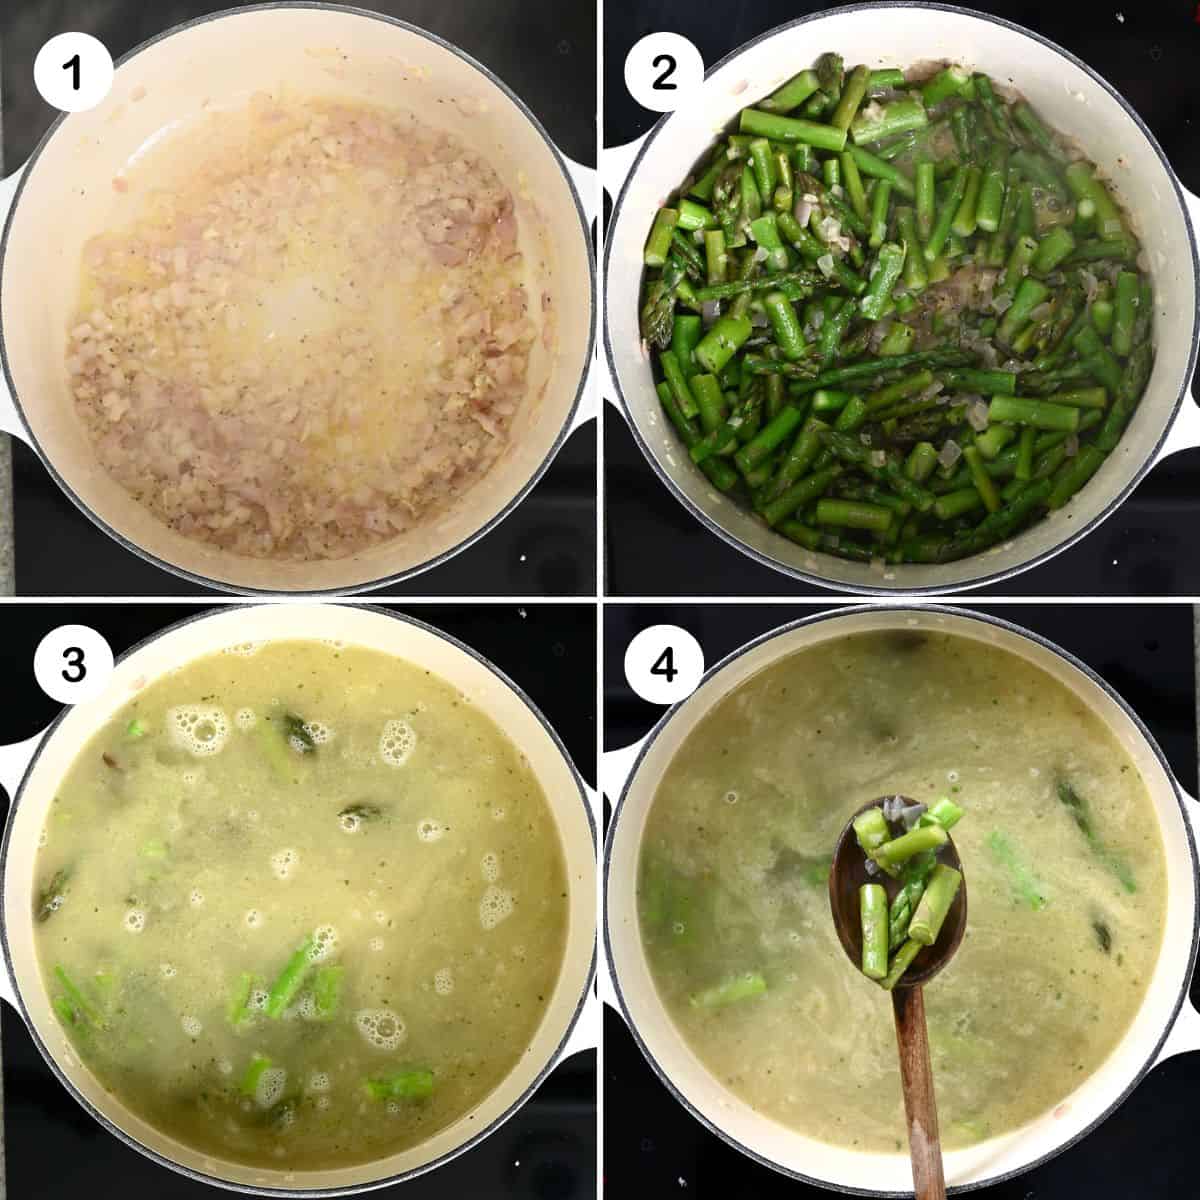 Steps for cooking asparagus